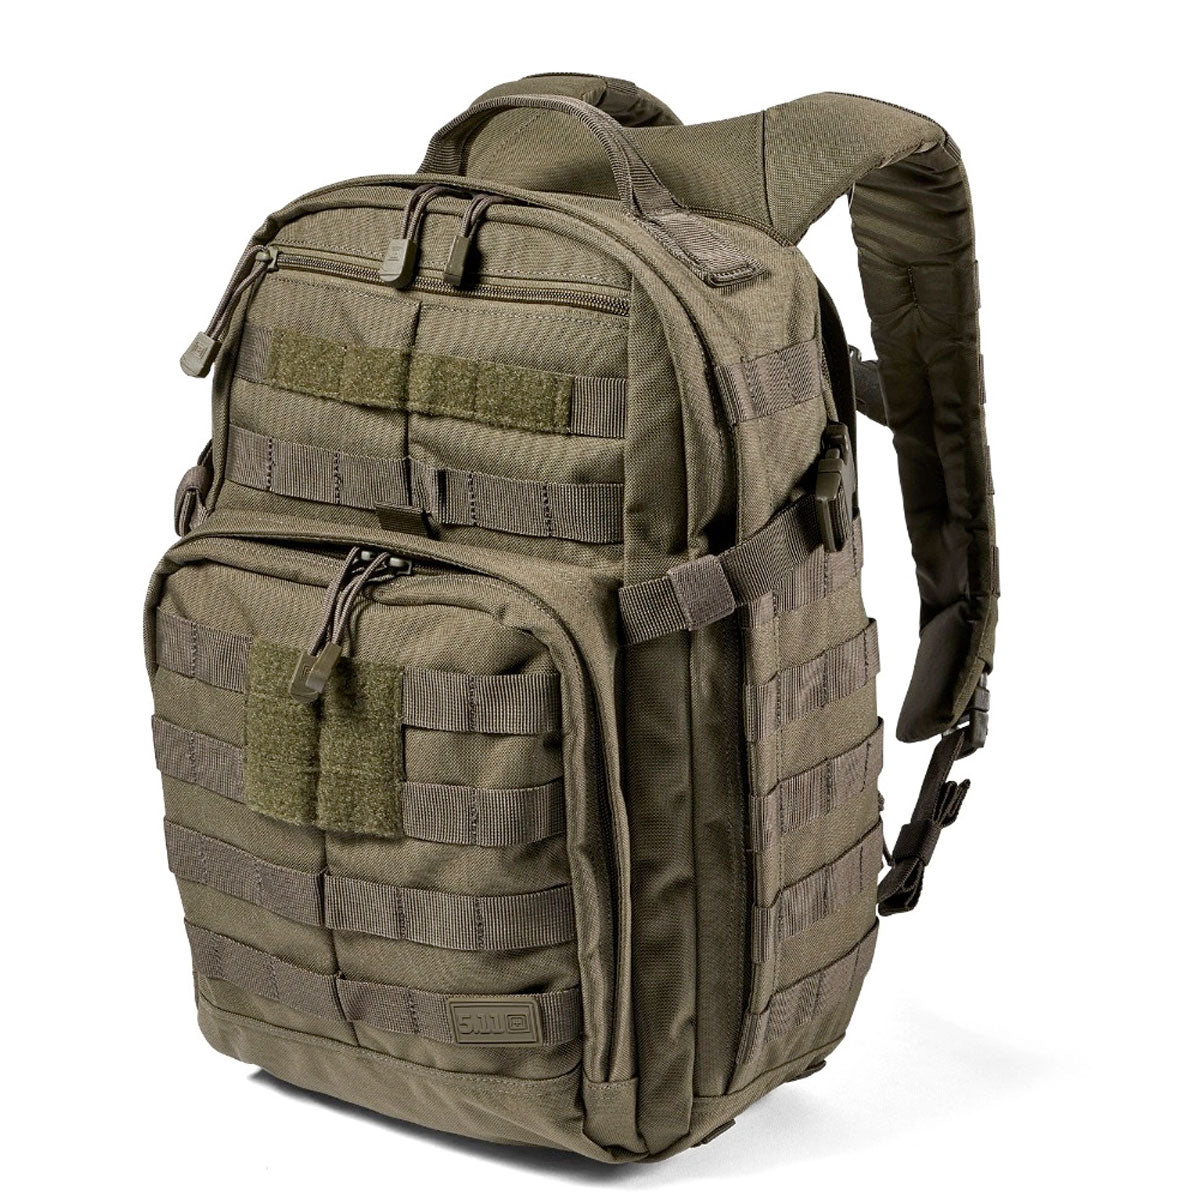 5.11 Tactical Rush 12 Backpack 2.0 Bags, Packs and Cases 5.11 Tactical Ranger Green Tactical Gear Supplier Tactical Distributors Australia